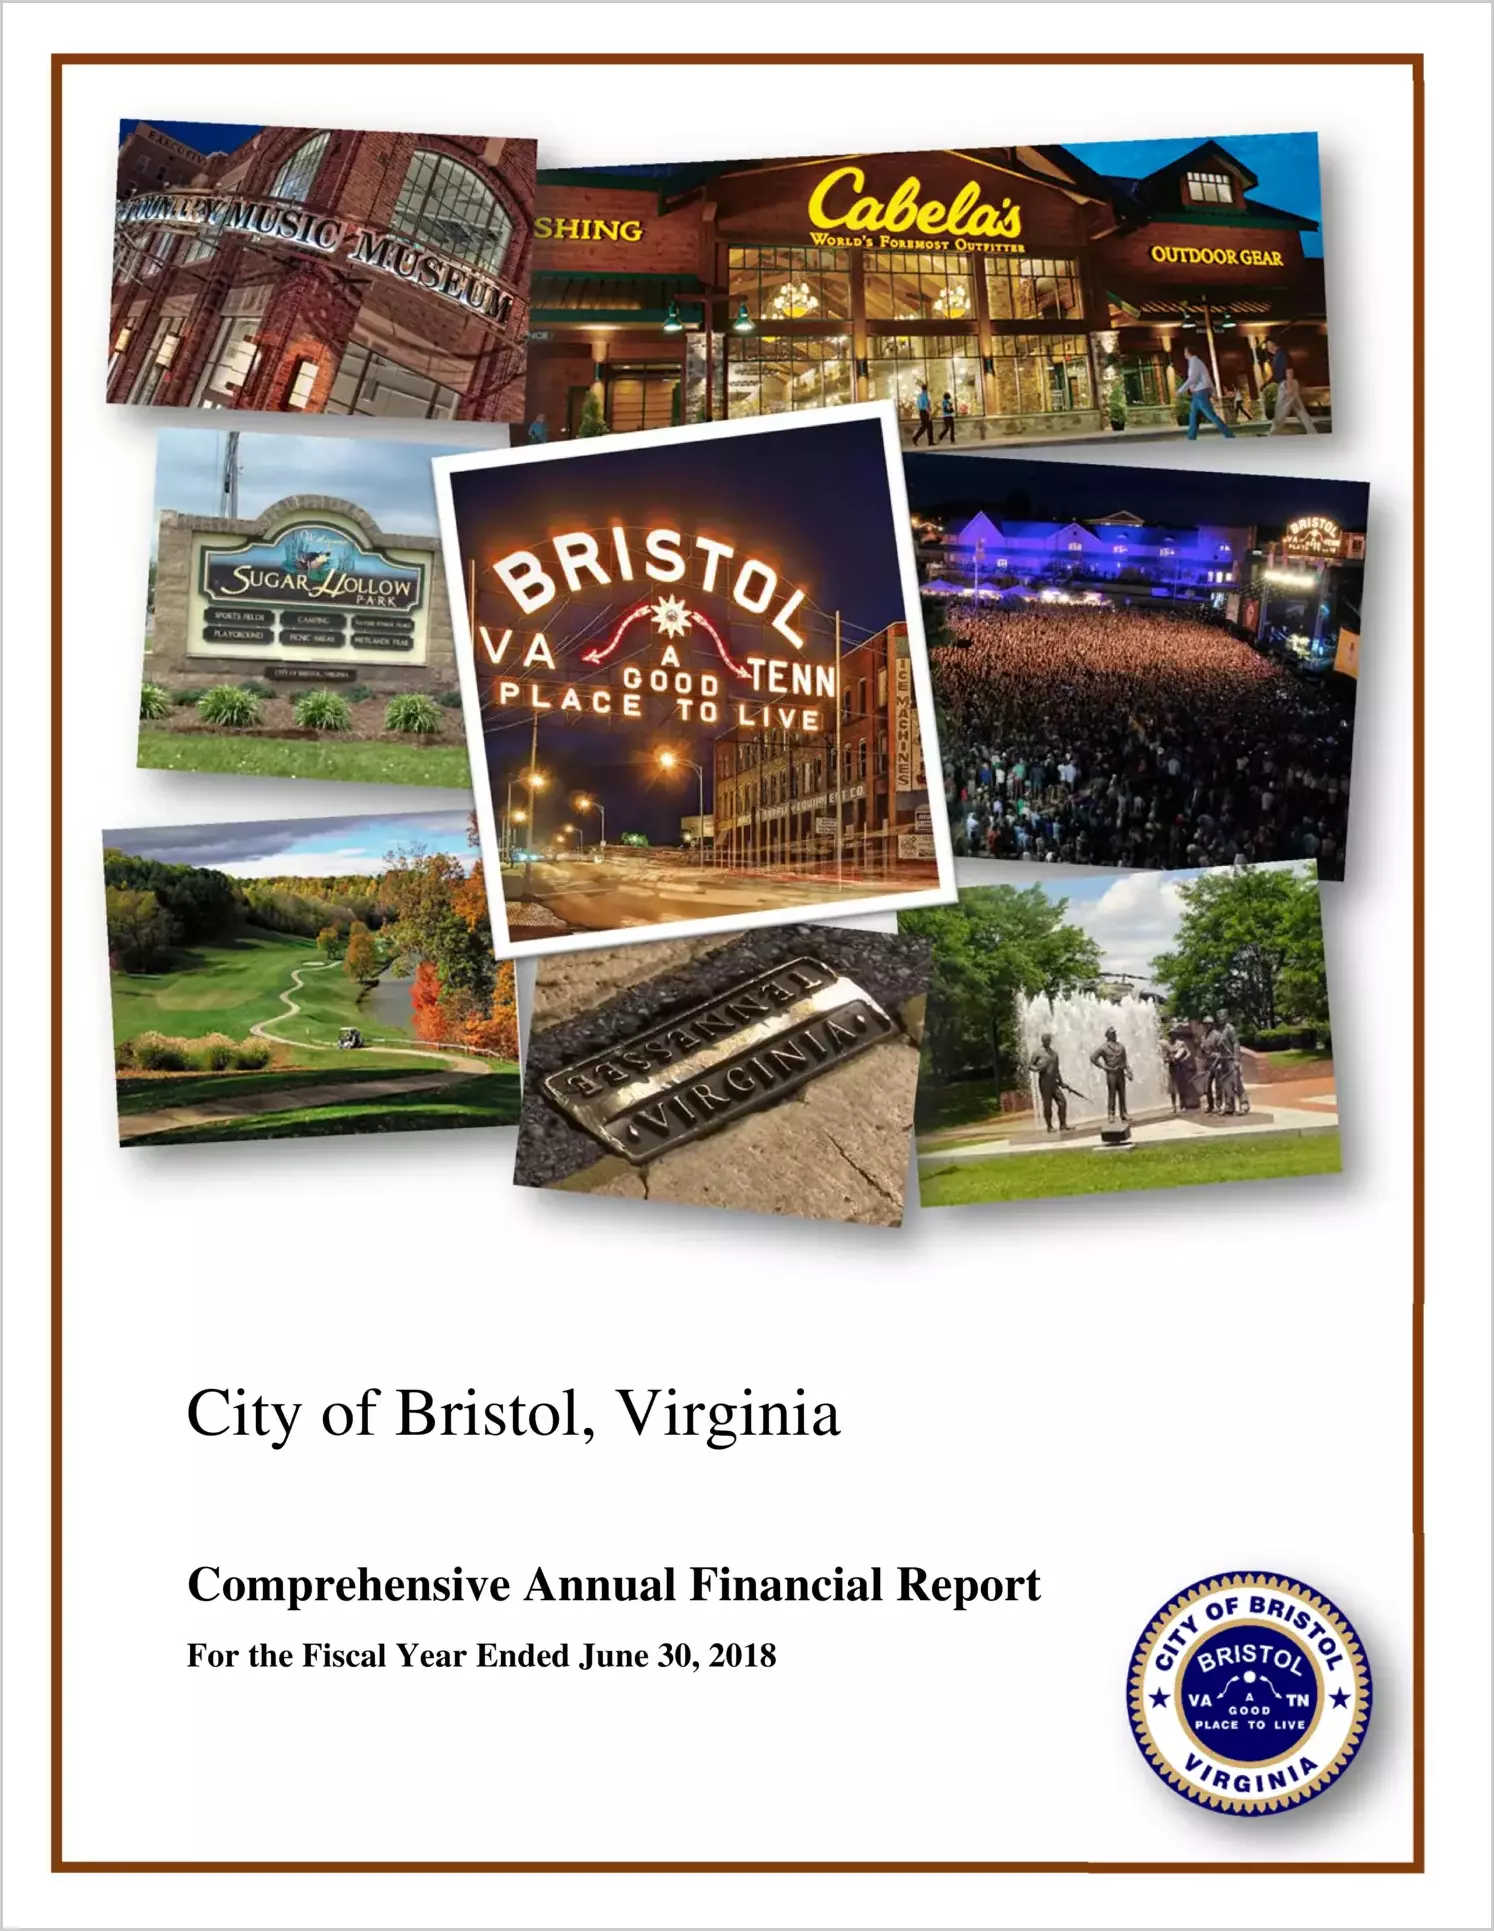 2018 Annual Financial Report for City of Bristol